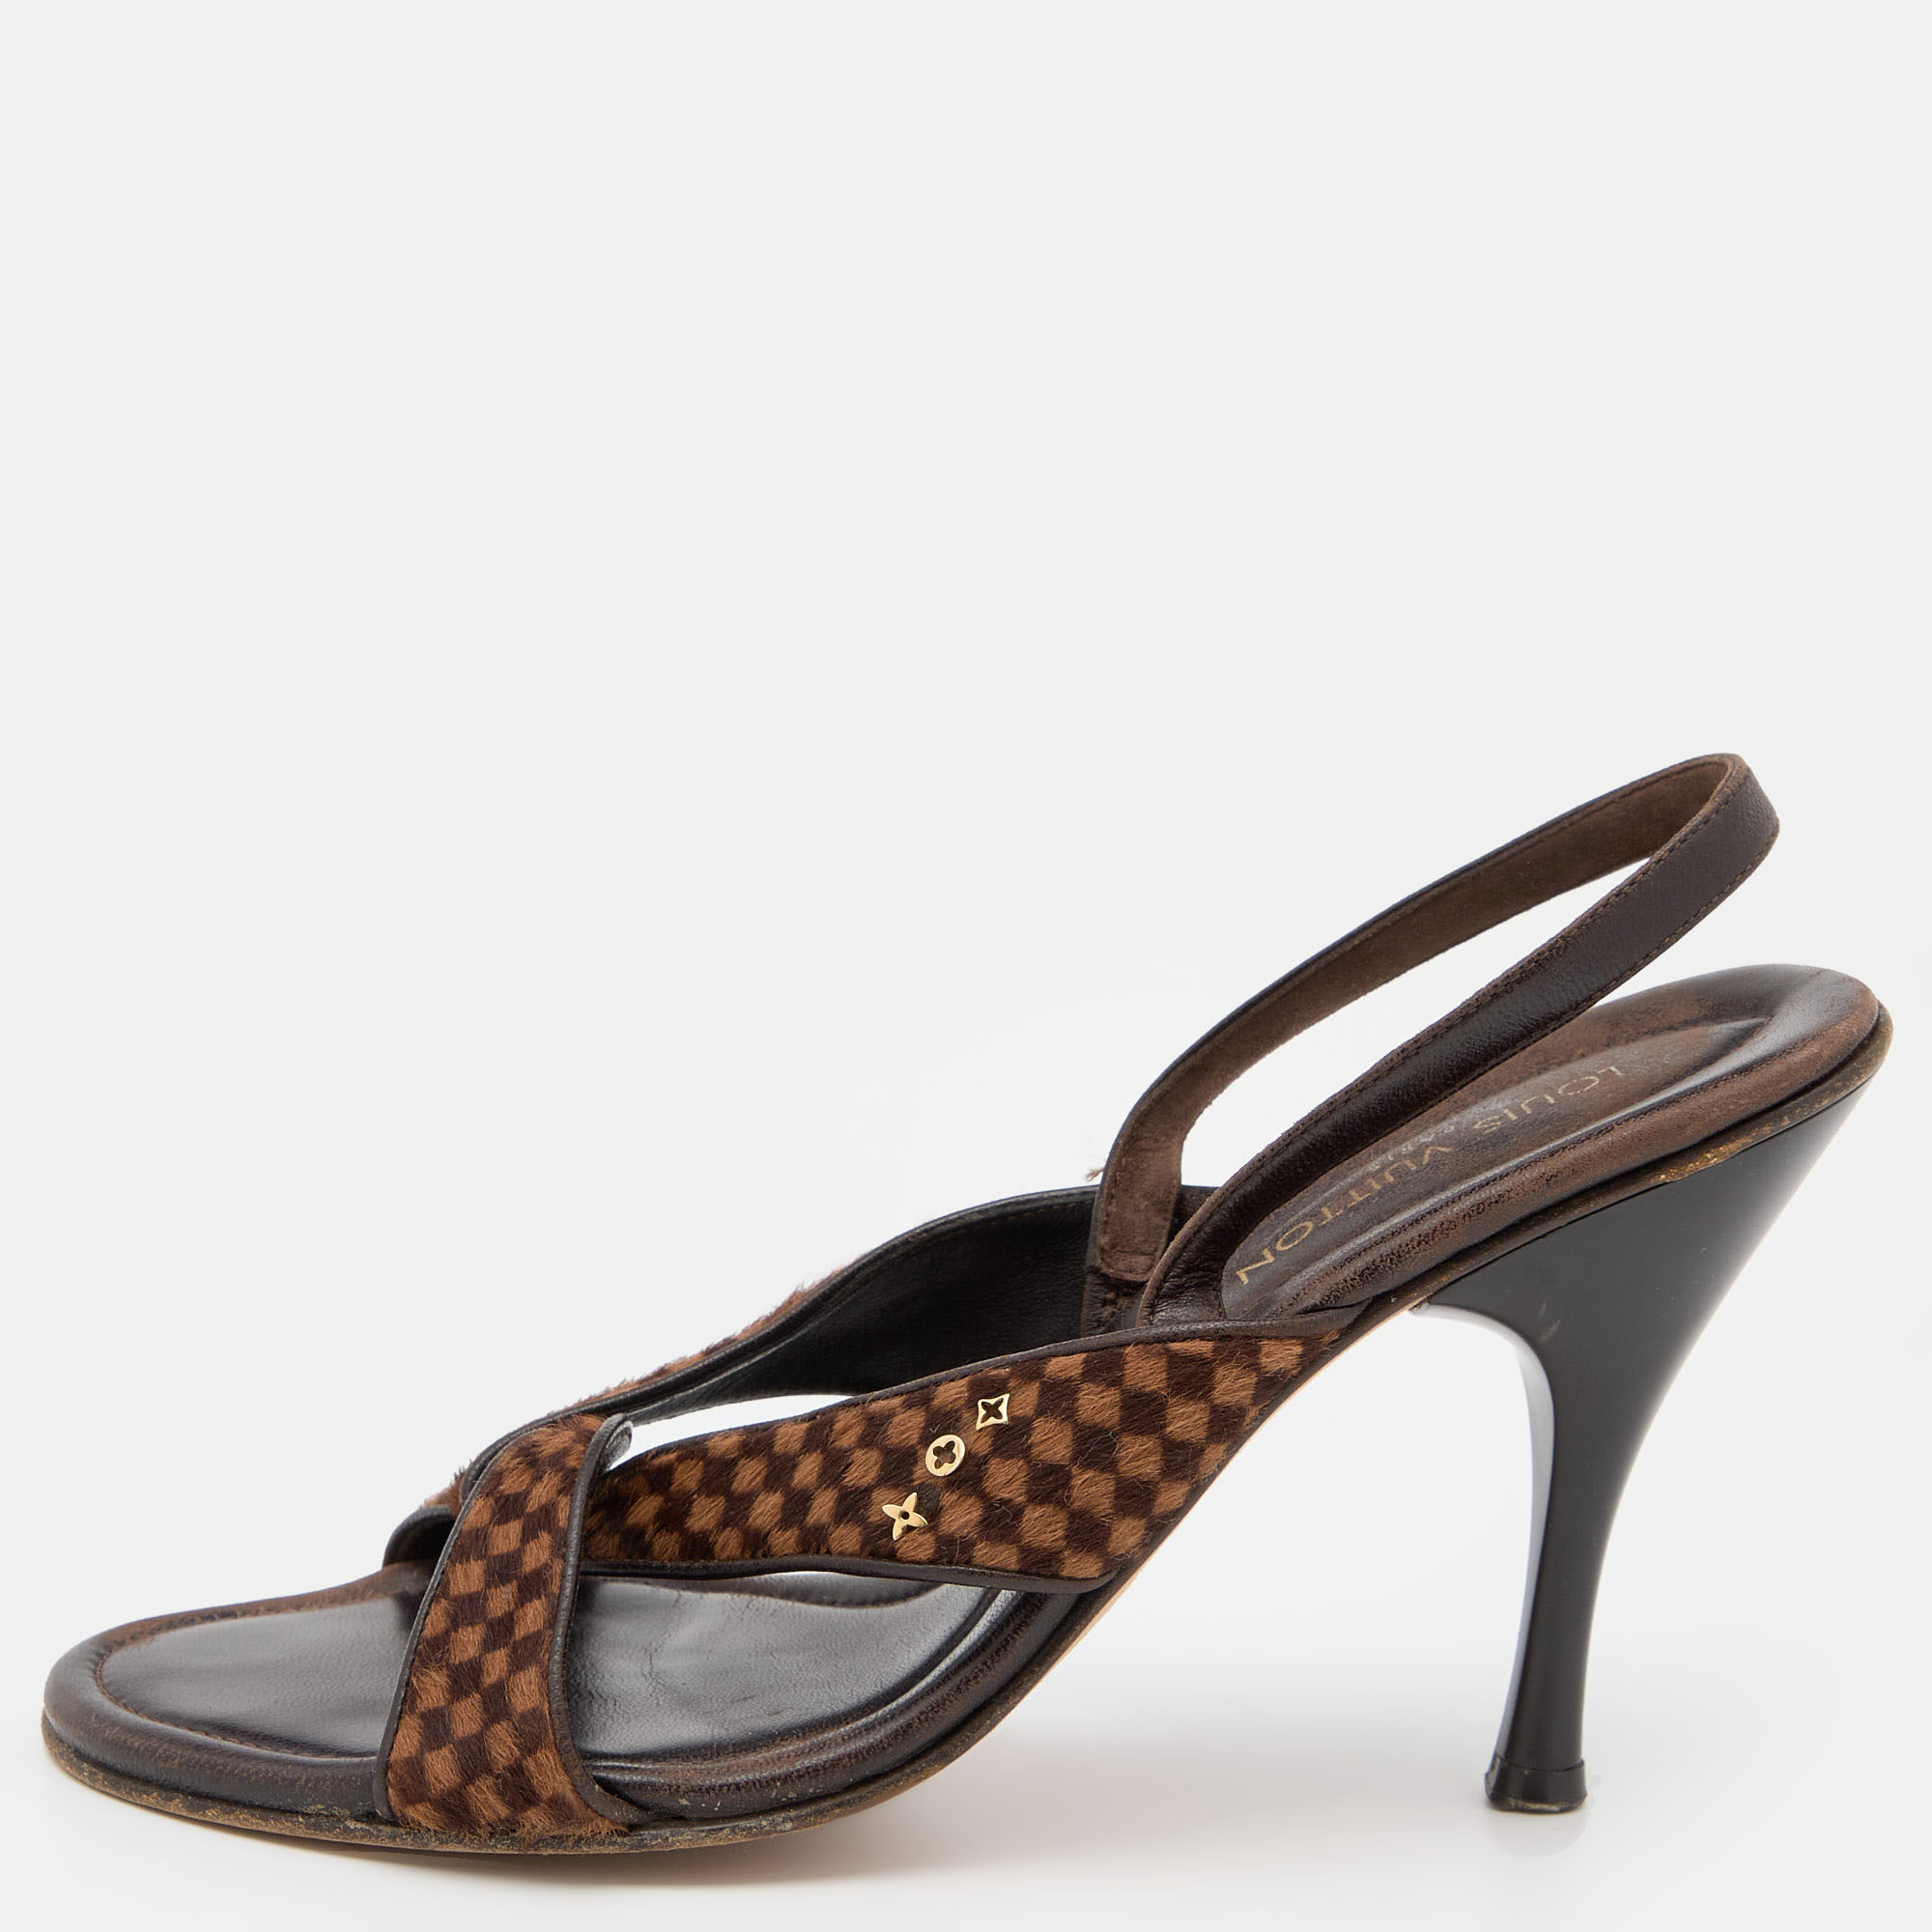 Louis Vuitton Brown Damier Ebene Calf Hair And Leather Slingback Sandals Size 38